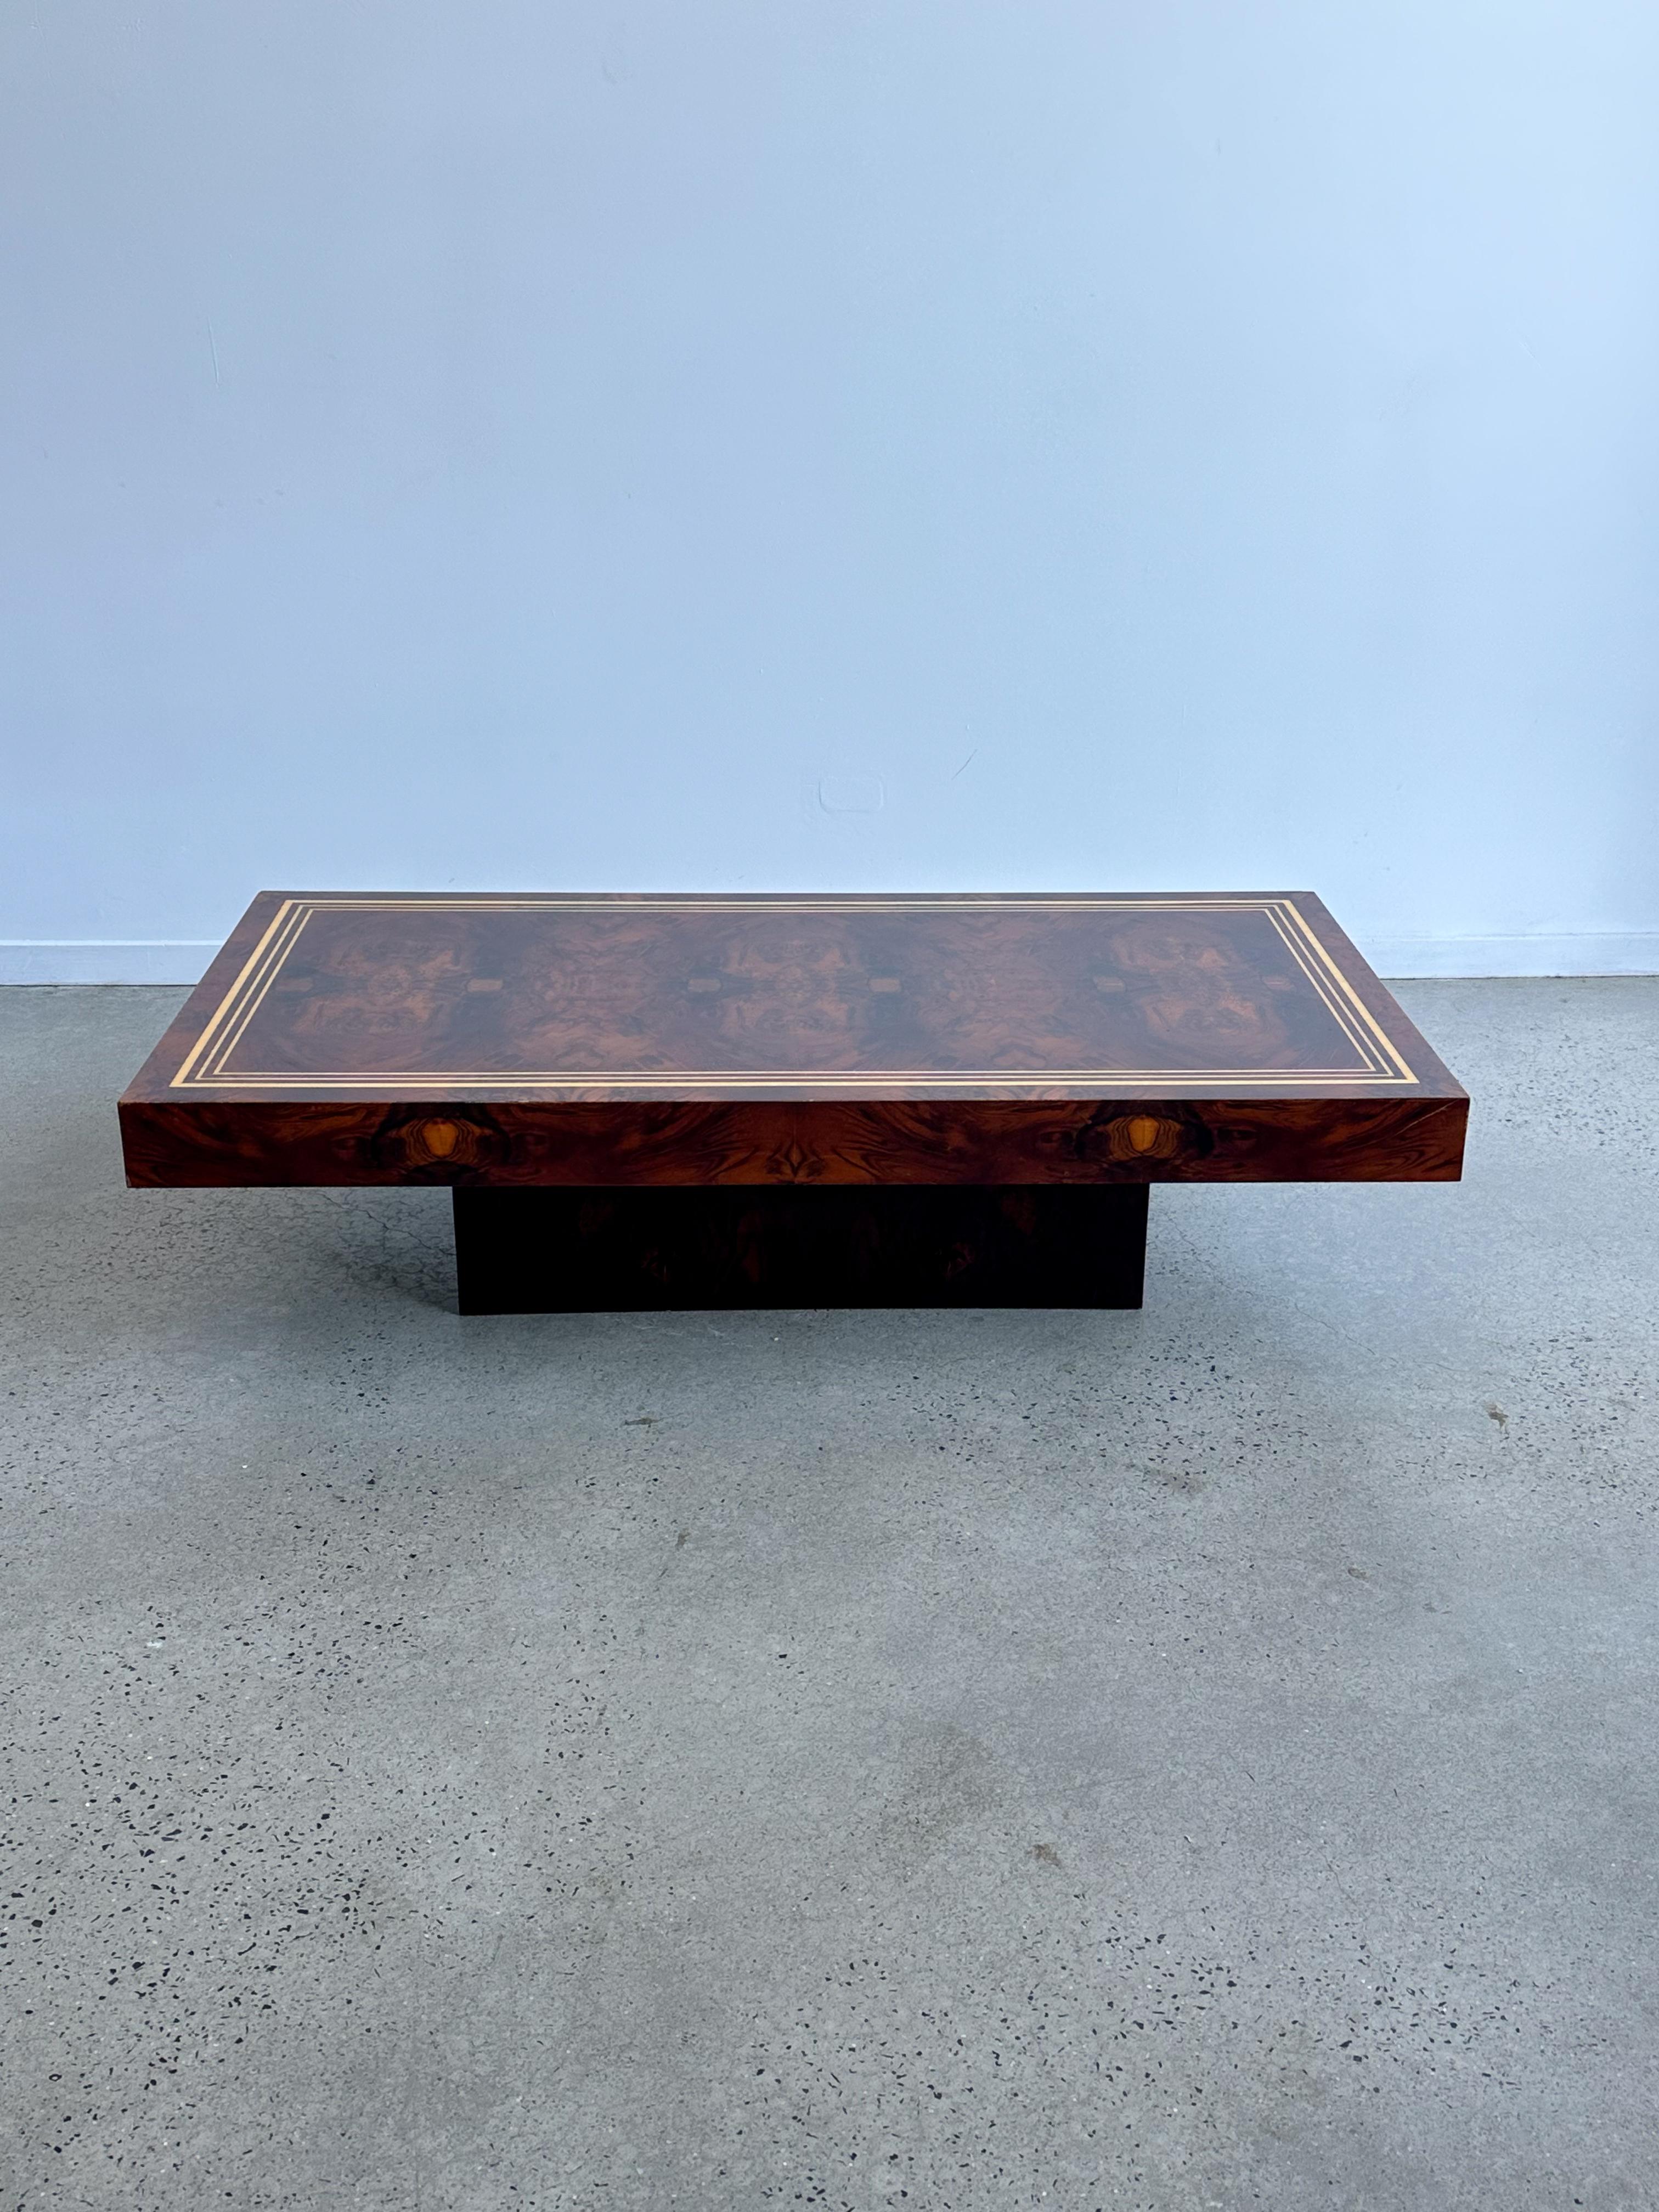 Italian Mid Century Modern Aldo Tura Burlwood floating platform base low/coffee table, 1950s.
The combination of Modernist design with the densely grained Burlwood veneers creates a refreshing, informal, warm and sophisticated aesthetic.
The